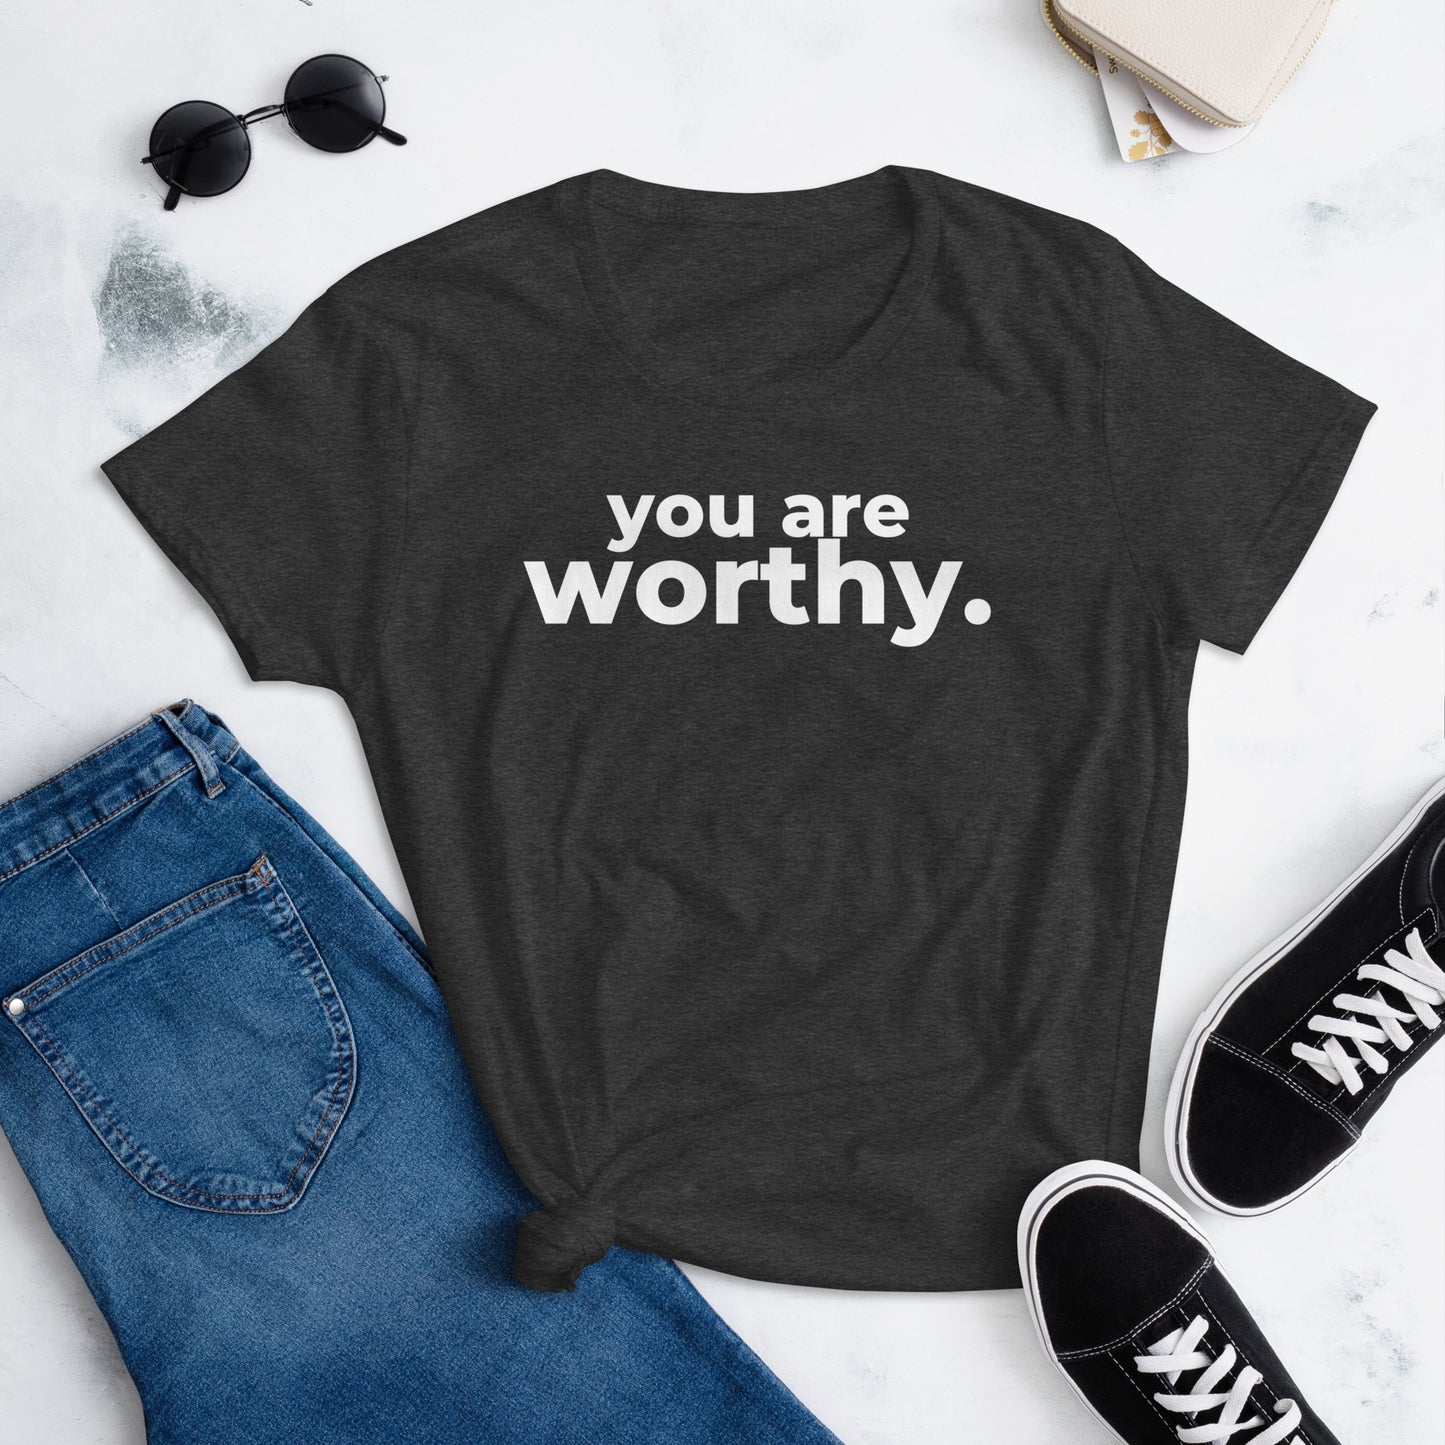 You are Worthy - Women's short sleeve t-shirt